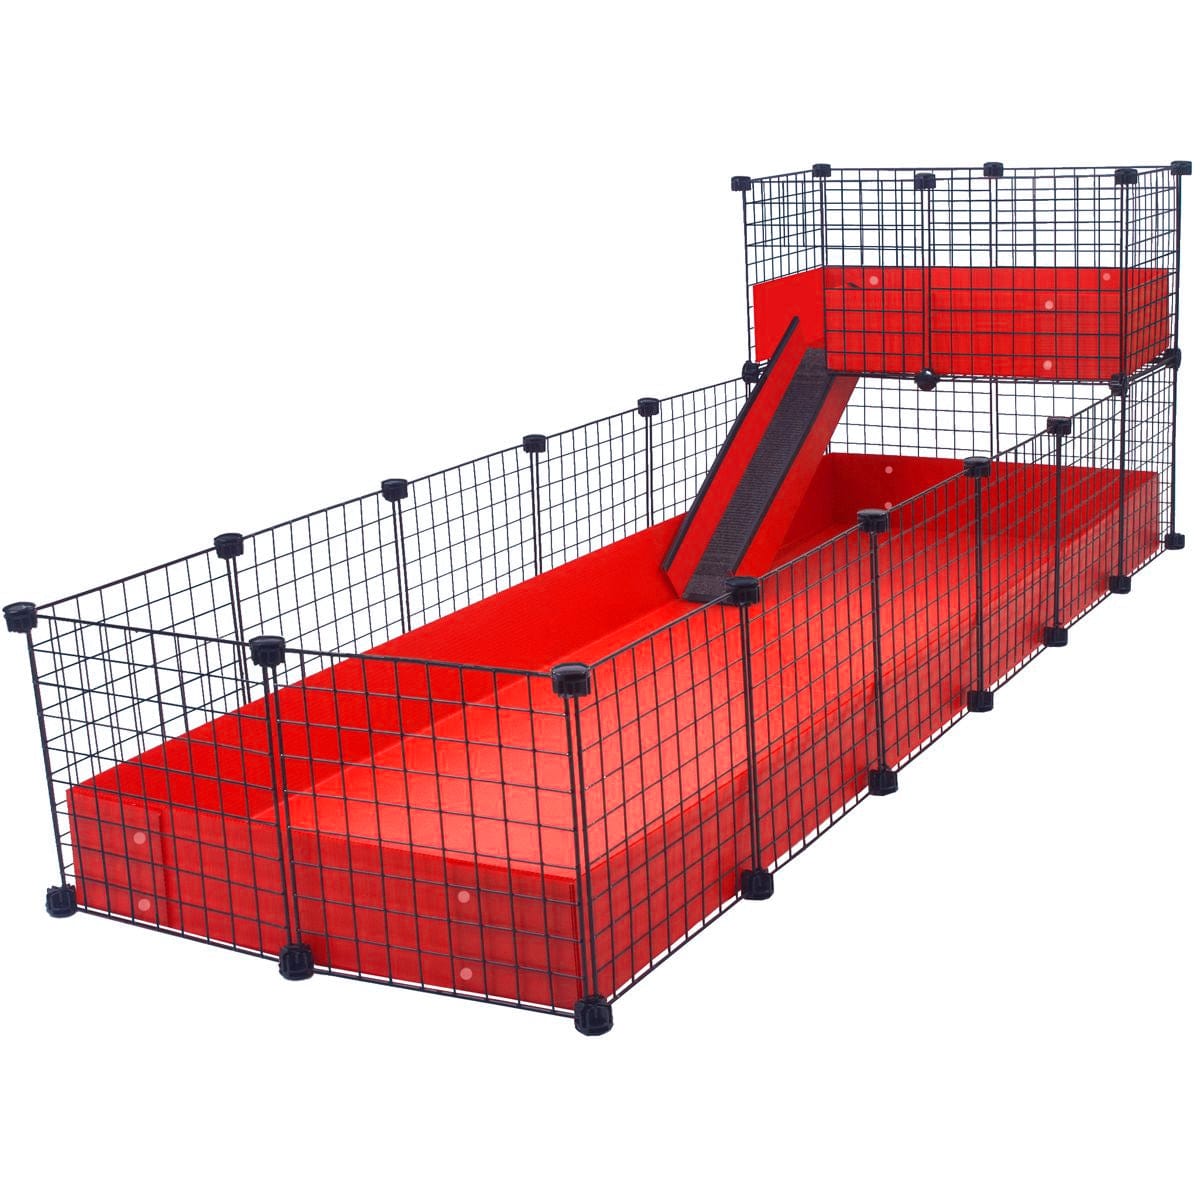 Jumbo red C&C guinea pig cage with narrow loft and ramp using black grids and connectors